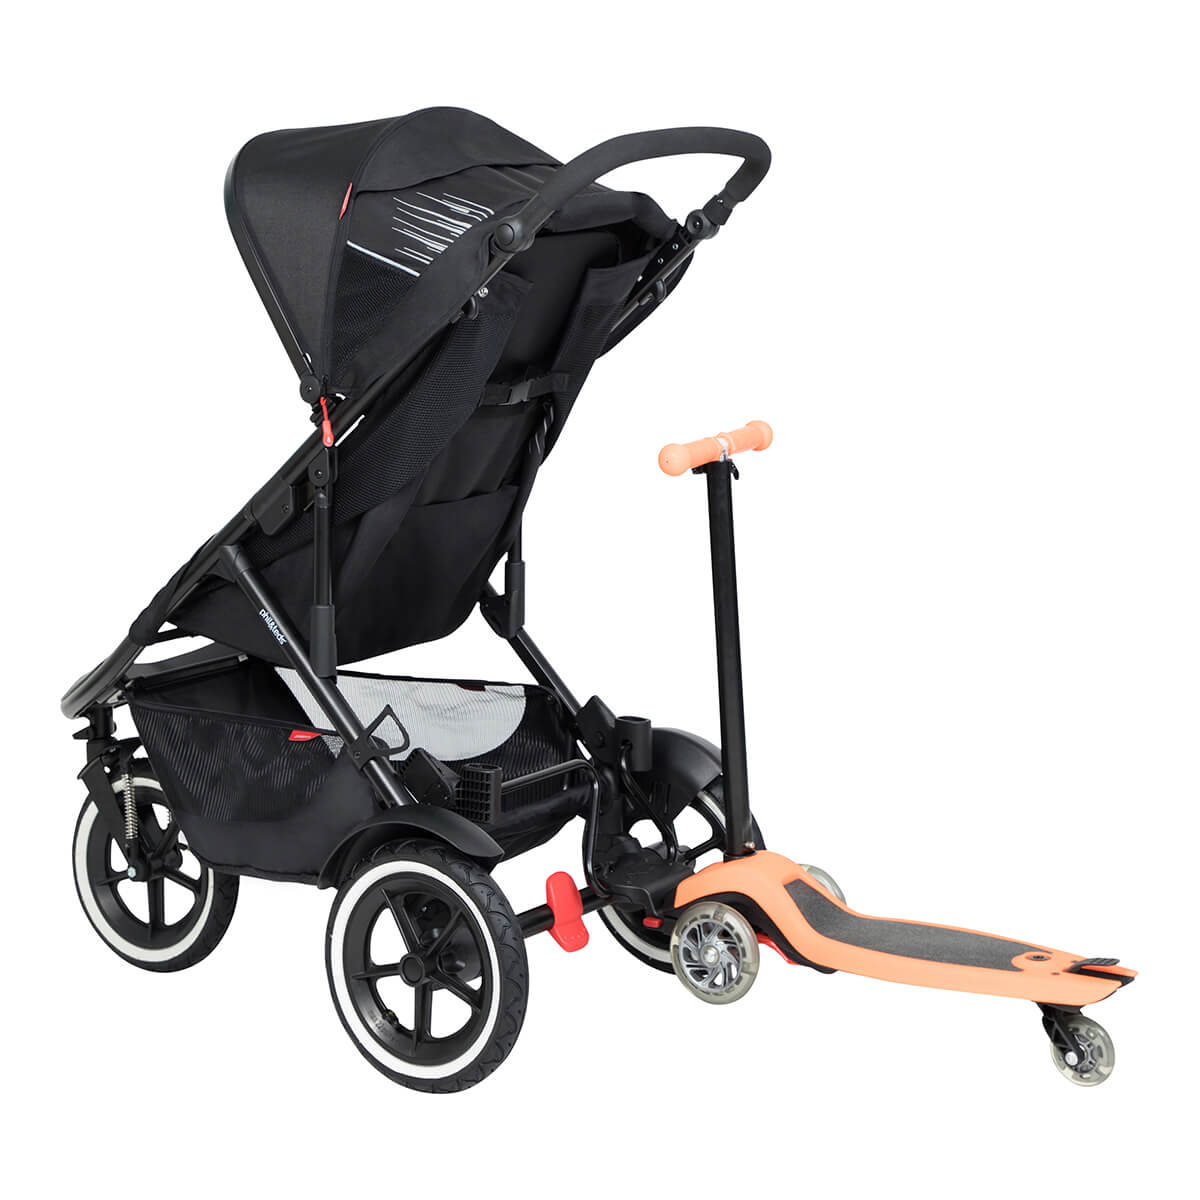 https://cdn.accentuate.io/4417288110114/19437753860274/philteds-sport-buggy-with-freerider-stroller-board-in-rear-v1626482774729.jpg?1200x1200